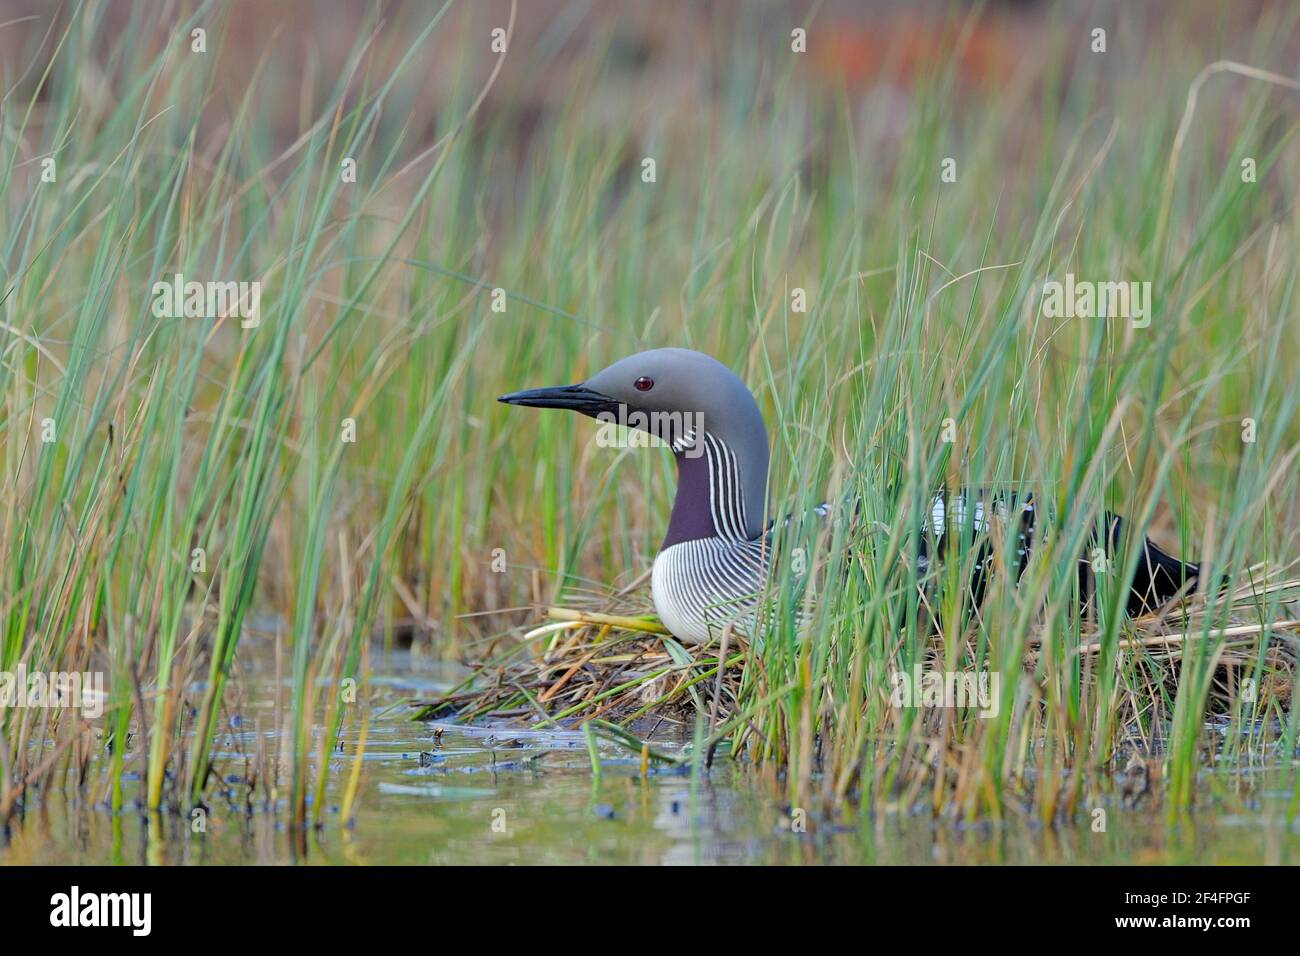 Black-throated loon (Gavia arctica) at the nest, Sweden Stock Photo